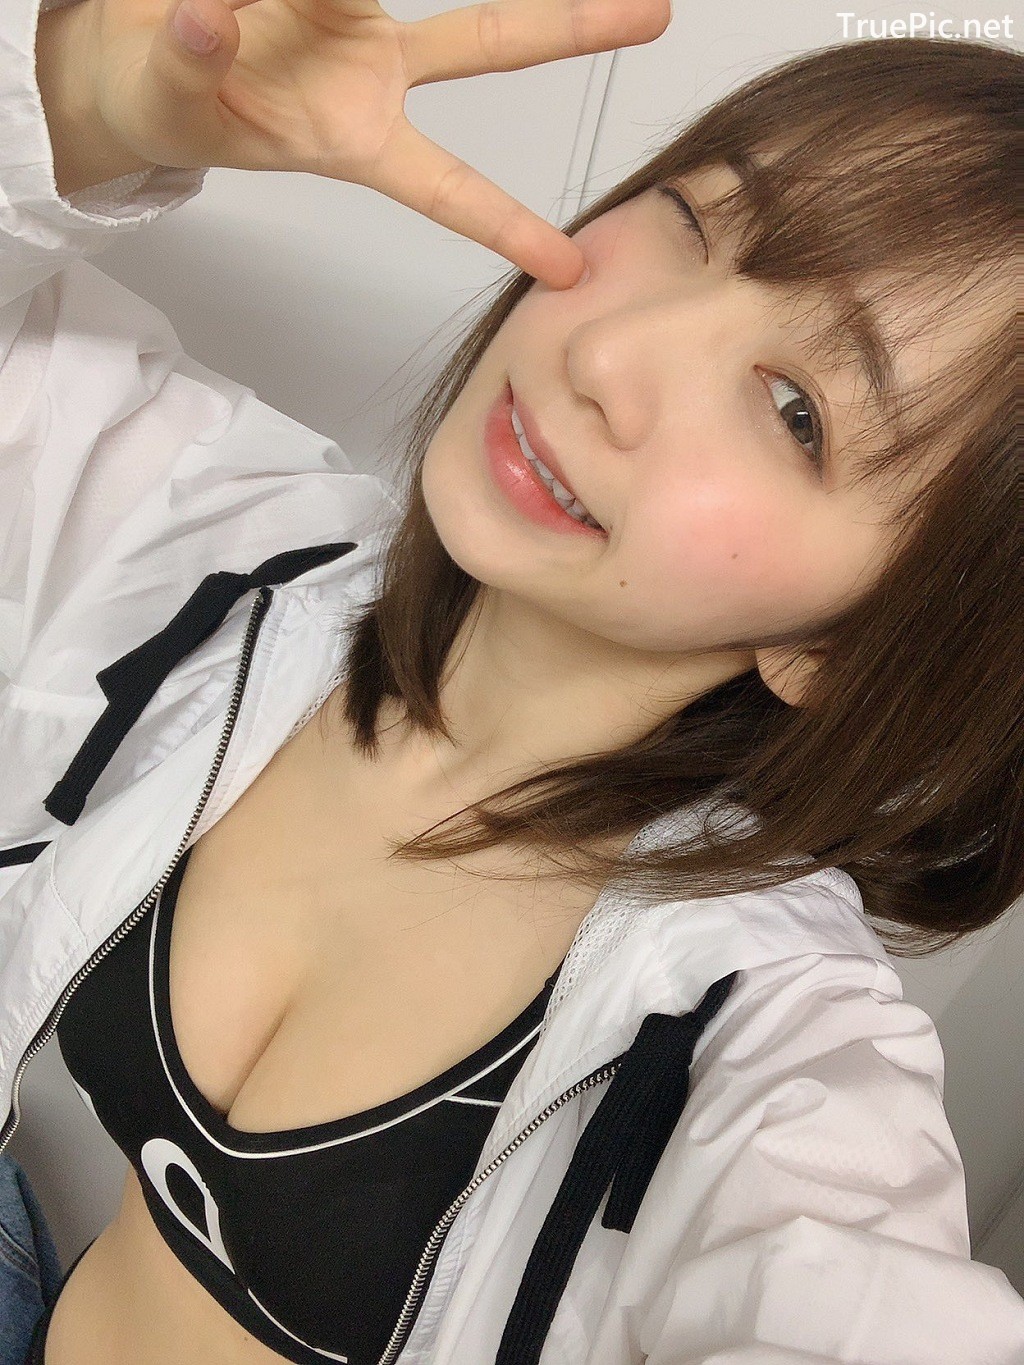 Image Japanese Cosplay Model - Iori Moe - [Young Champion] 2019 No.11 - TruePic.net - Picture-38